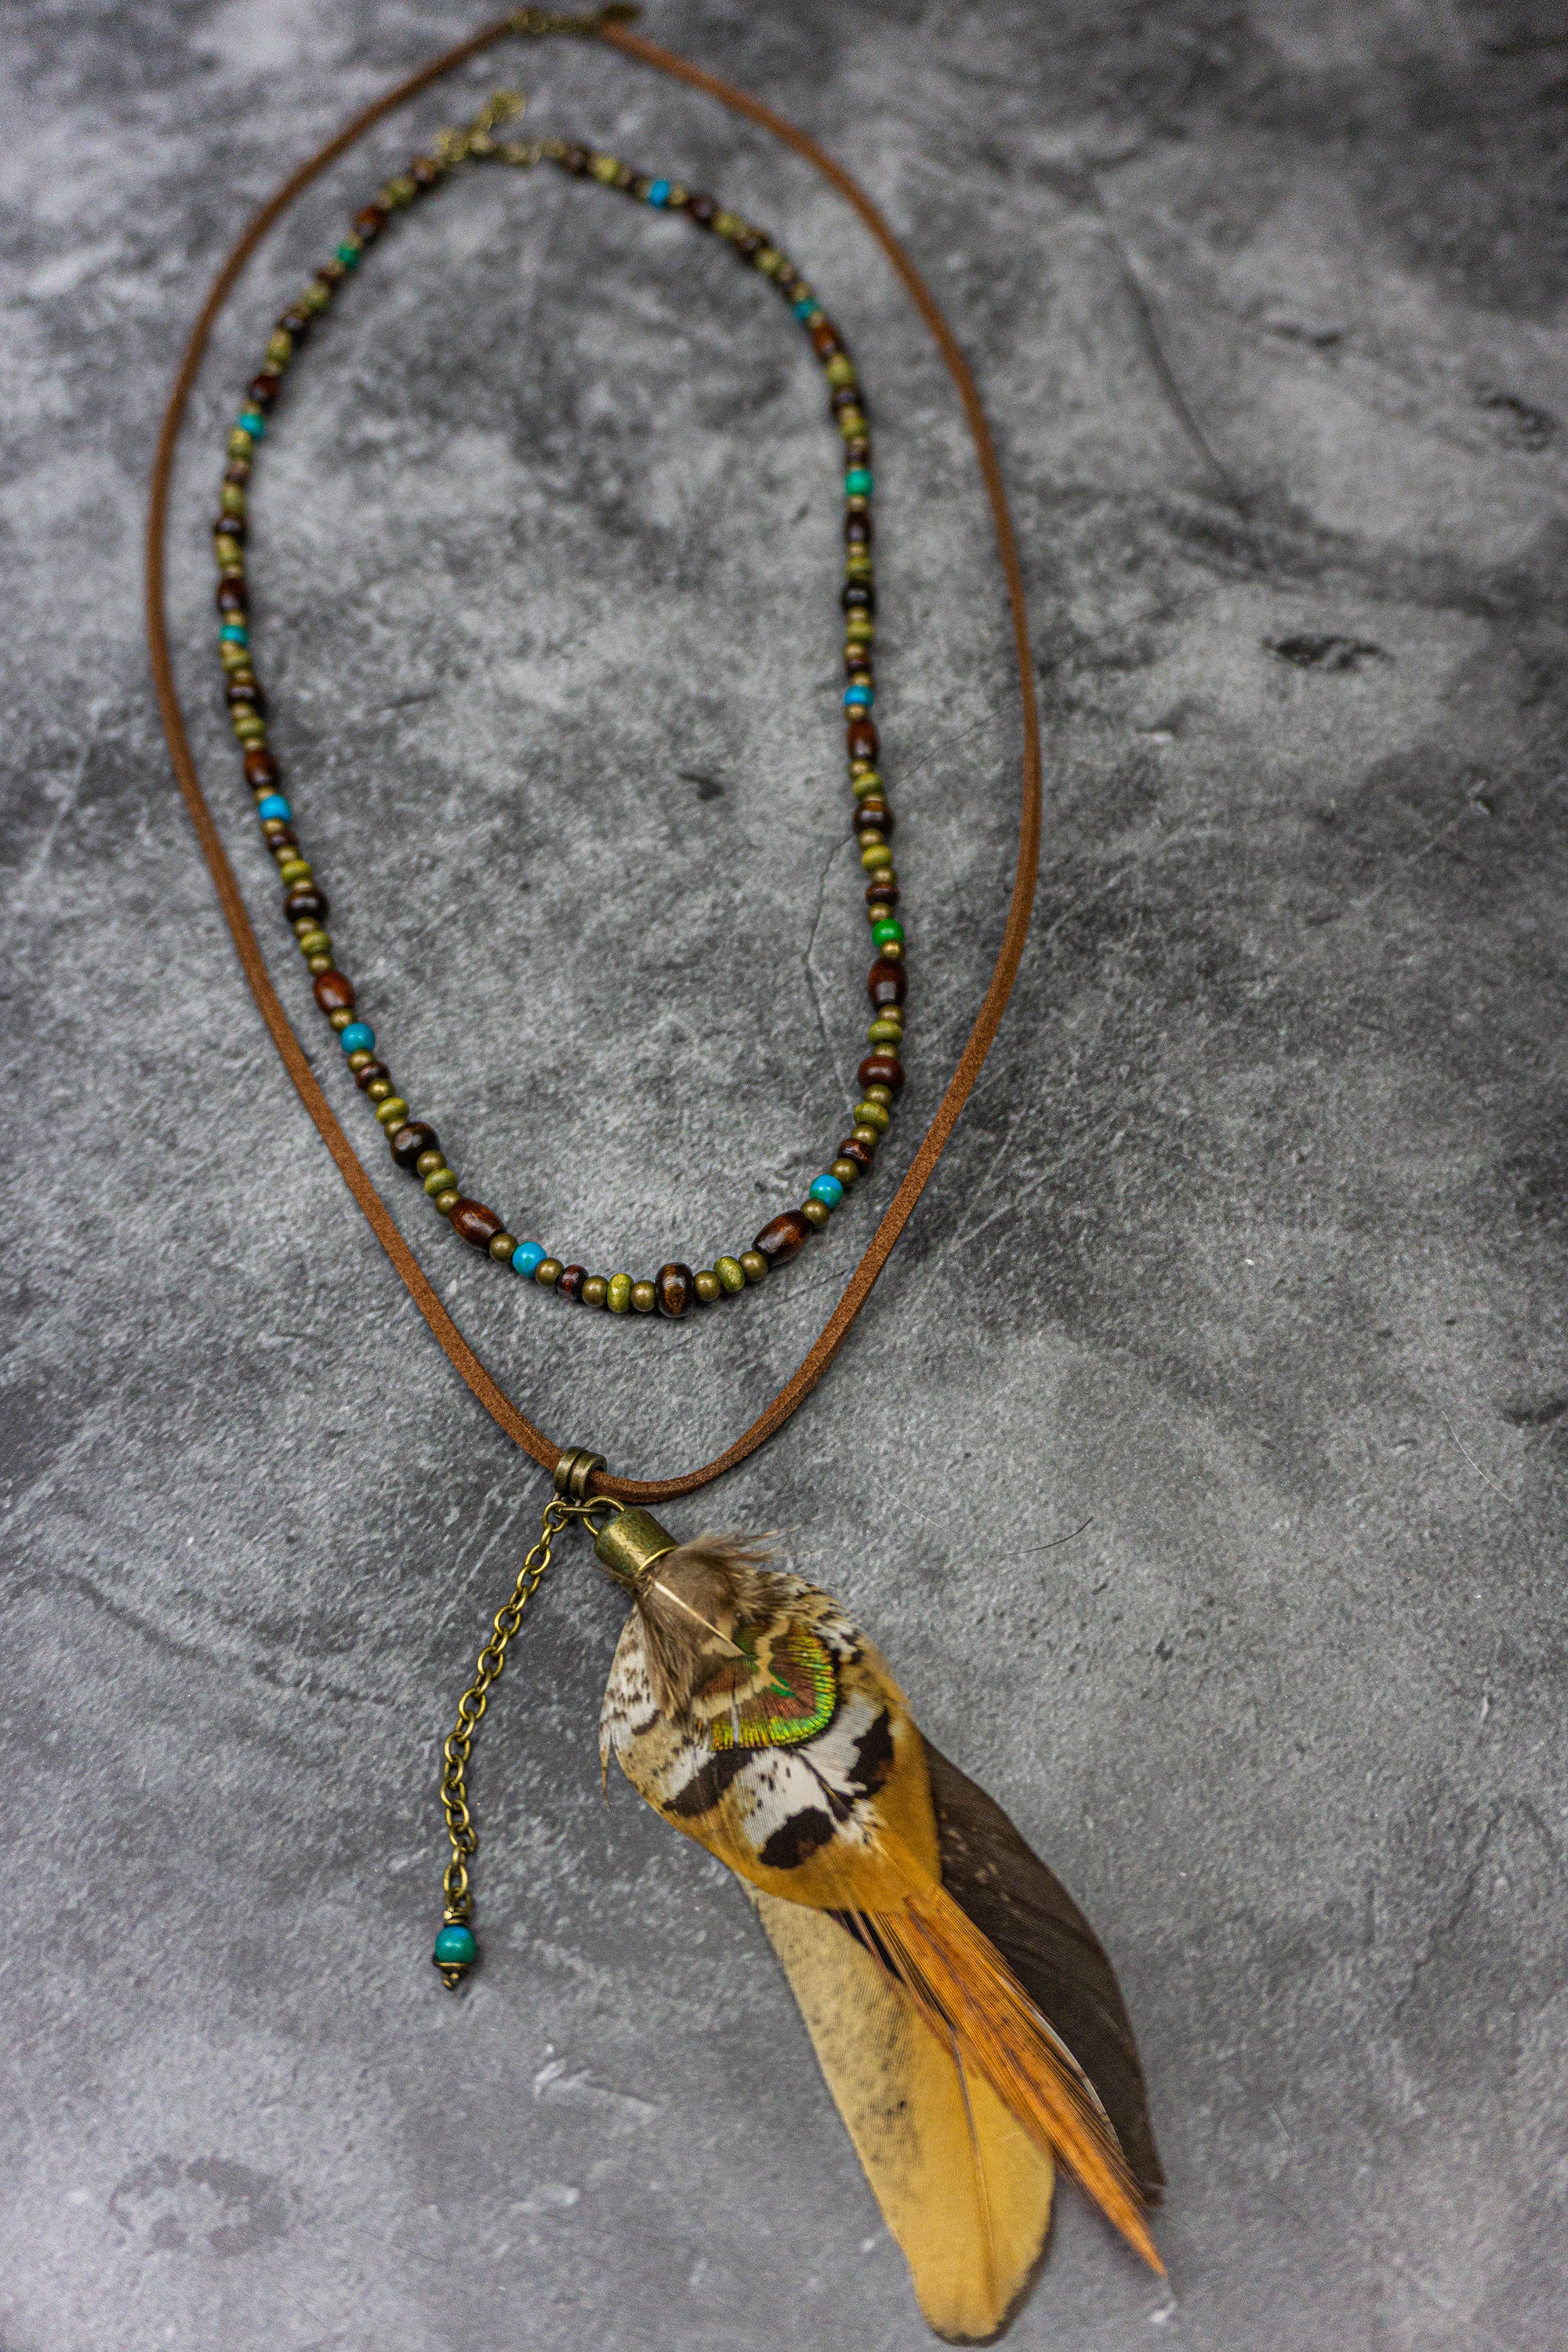 necklace set made of one wooden beaded necklace and a feather pendant necklace made of leather